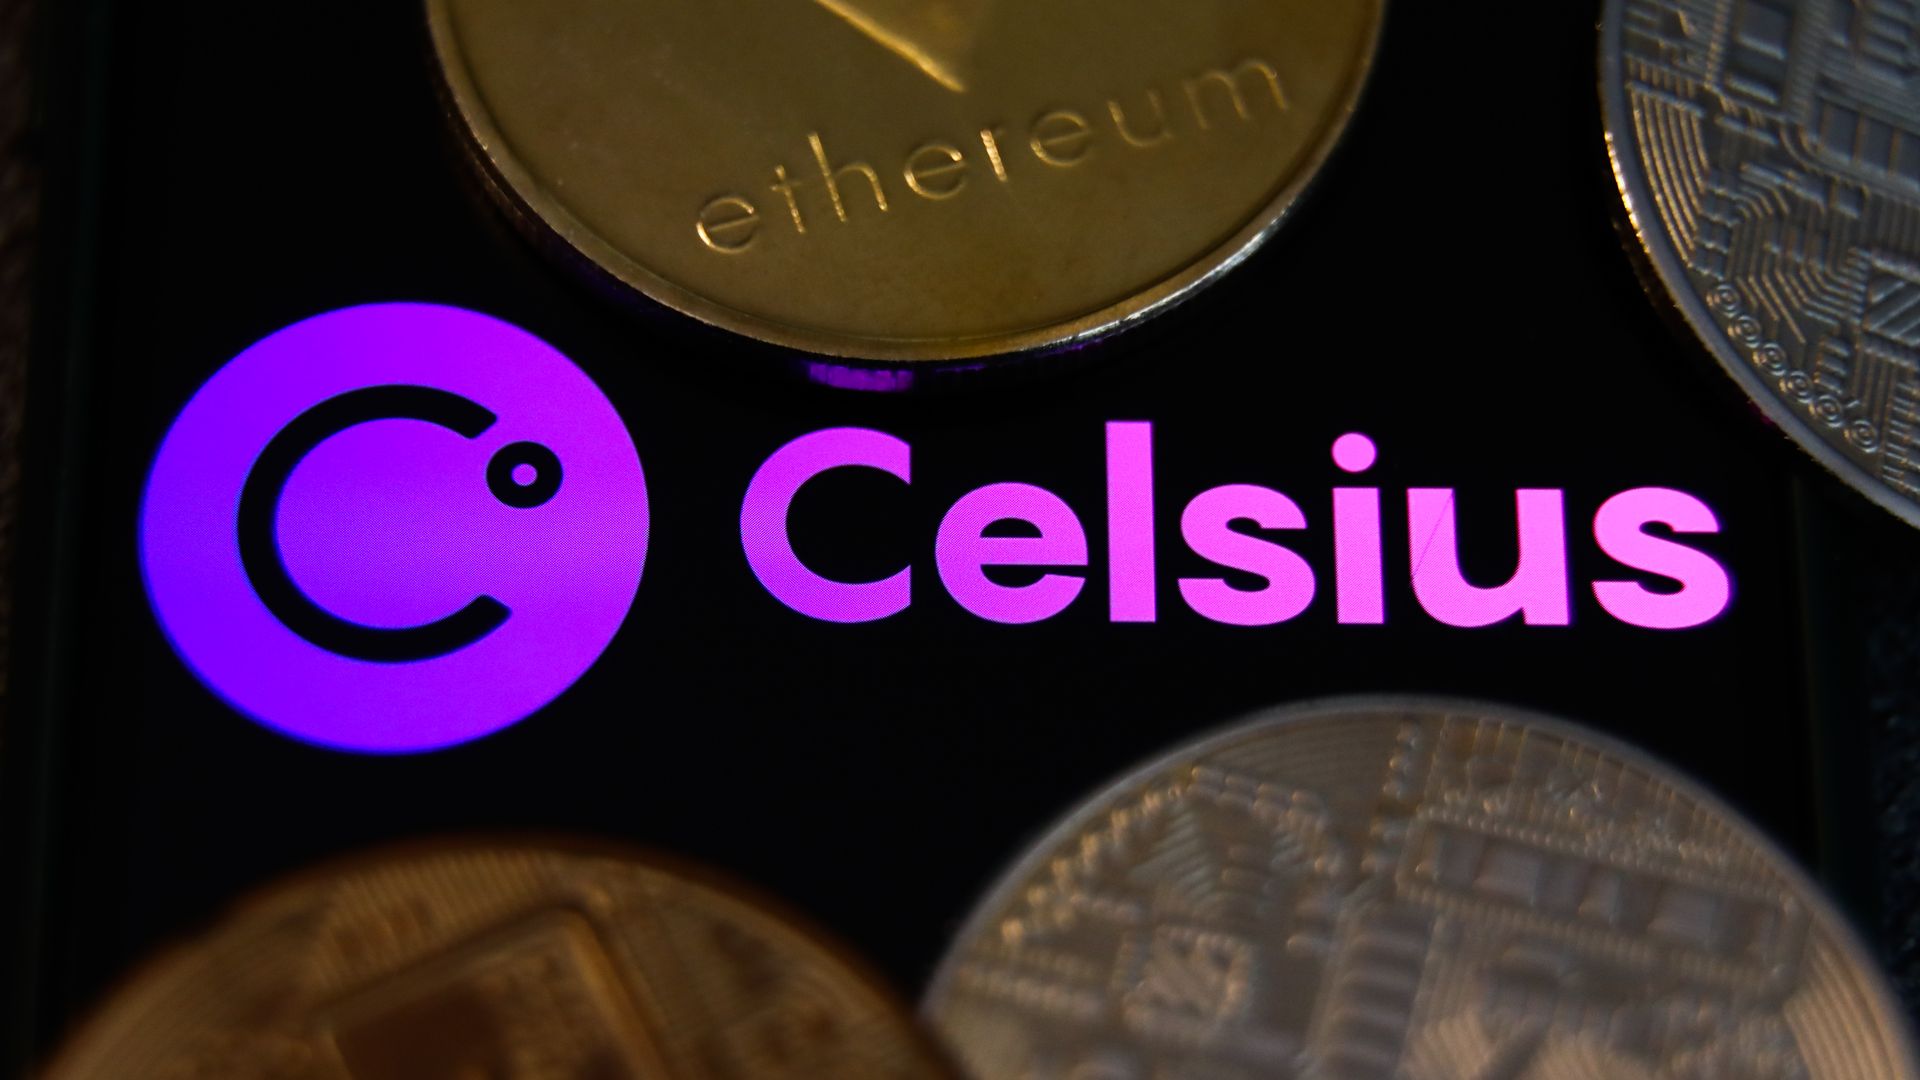 A photo illustration of the Celsius logo surrounded by physical coins.